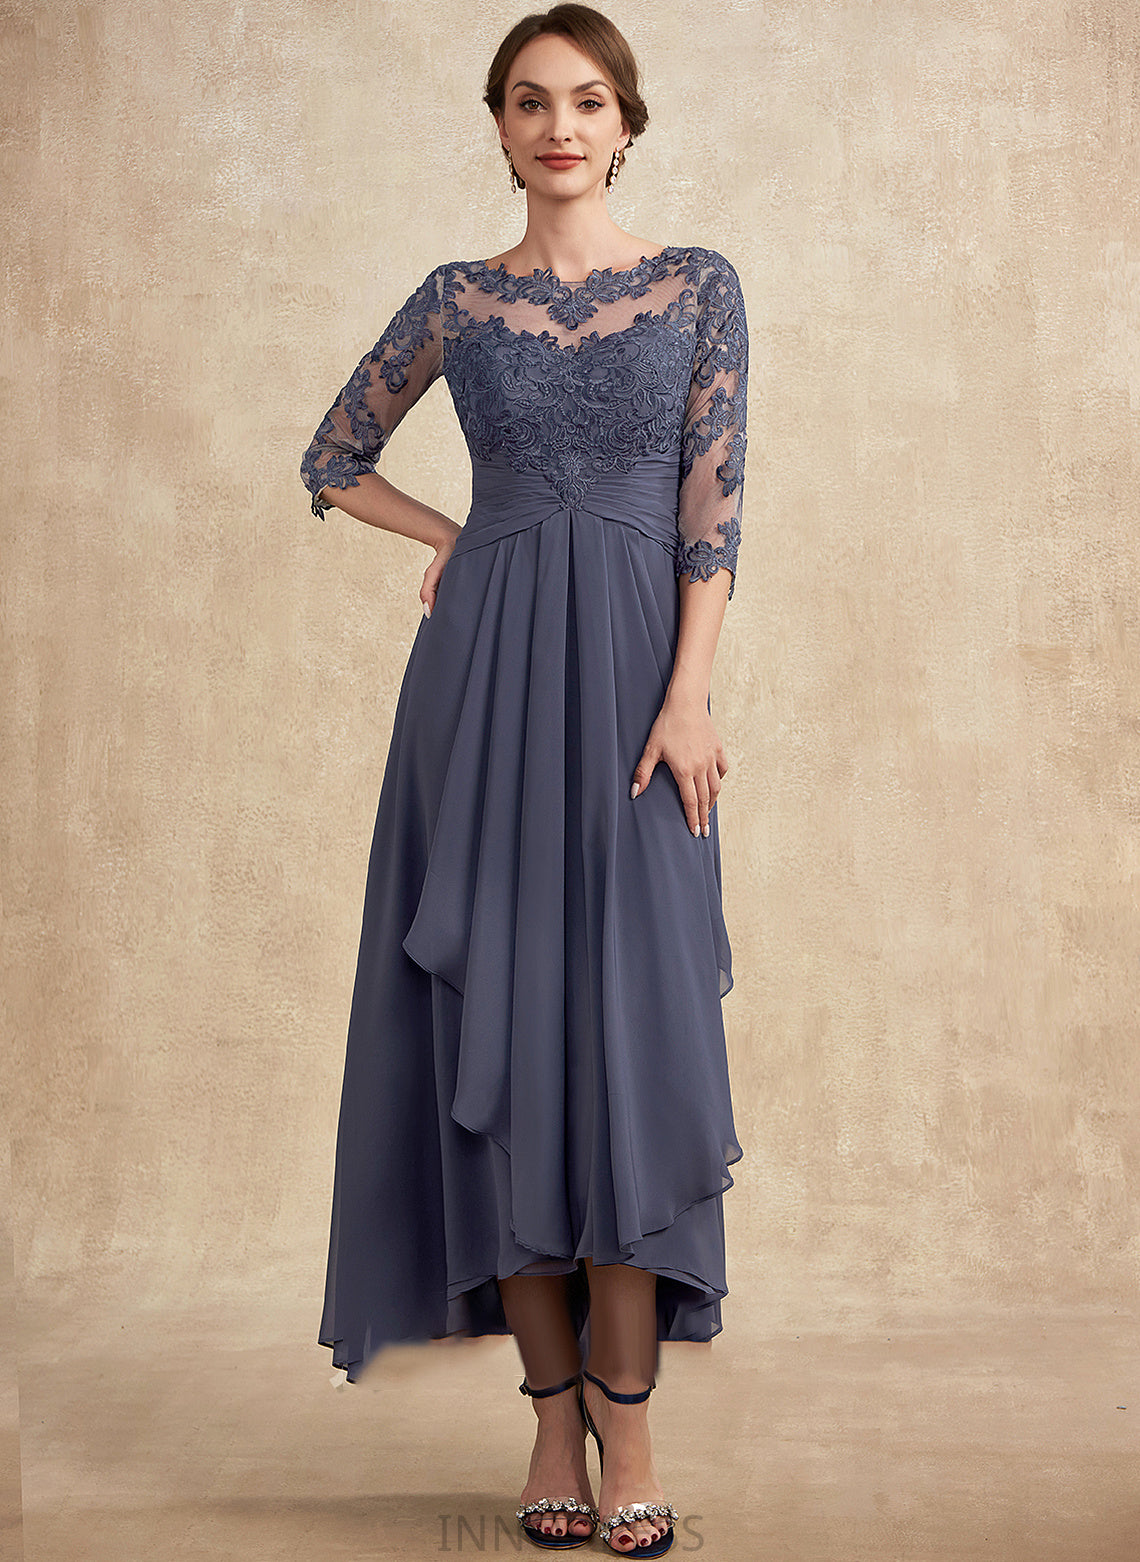 the Neck Chiffon Ruffle Dress of With Bride Scoop Suzanne Asymmetrical Lace Mother of the Bride Dresses Mother A-Line